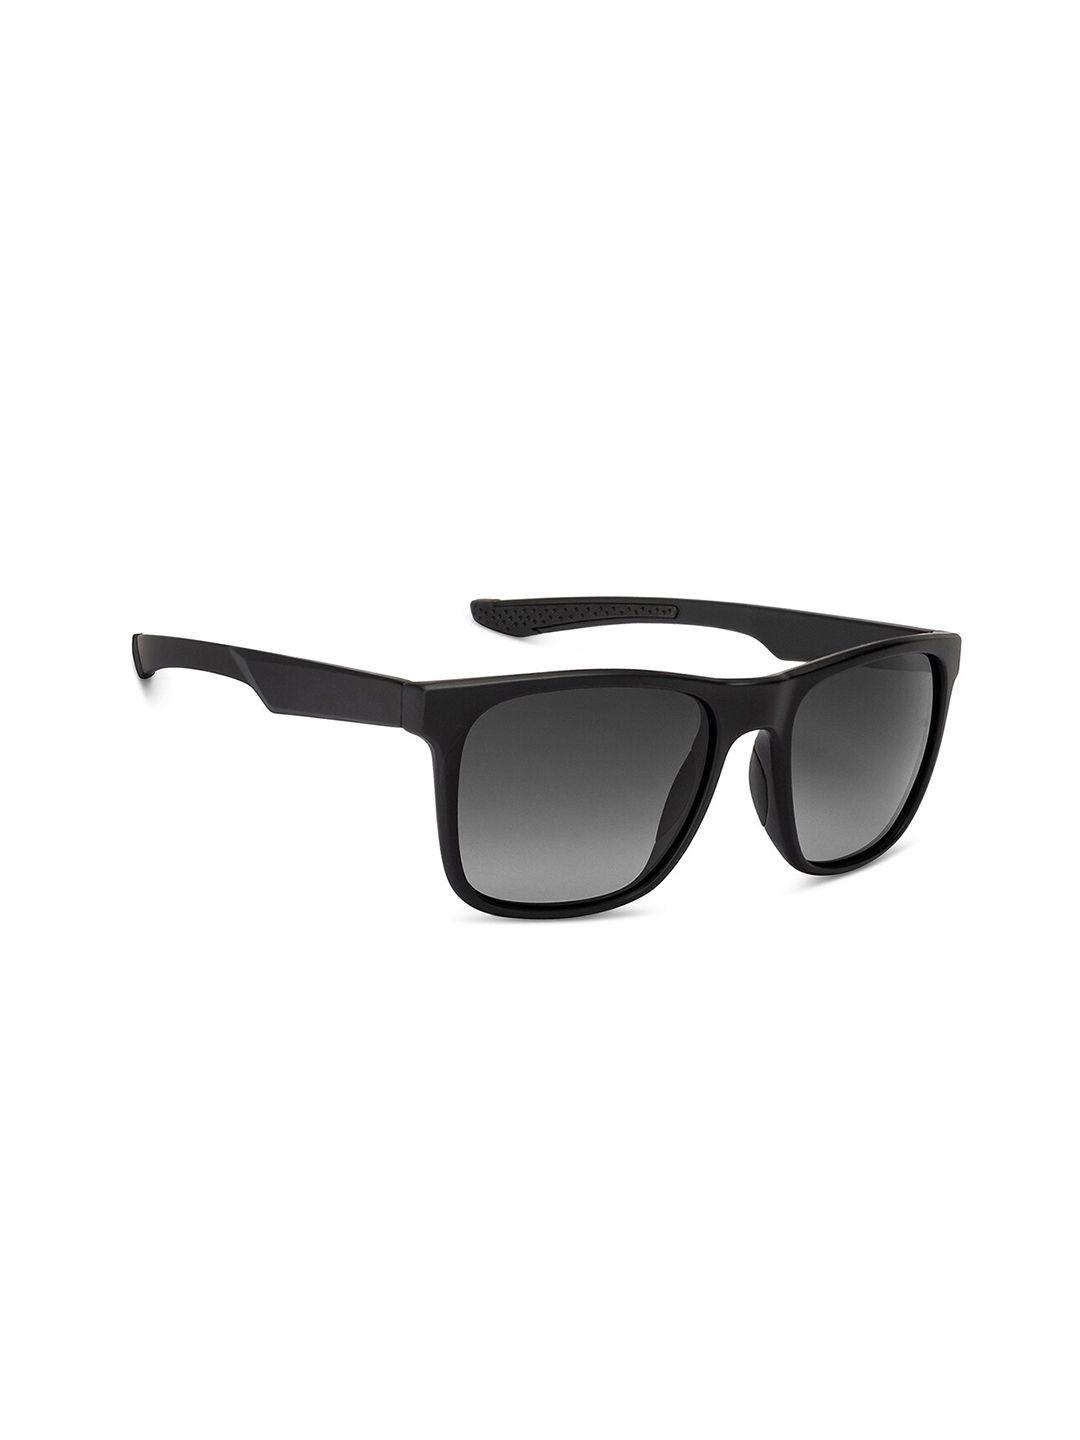 vincent-chase-lens-&-wayfarer-sunglasses-with-polarised-and-uv-protected-lens-204541